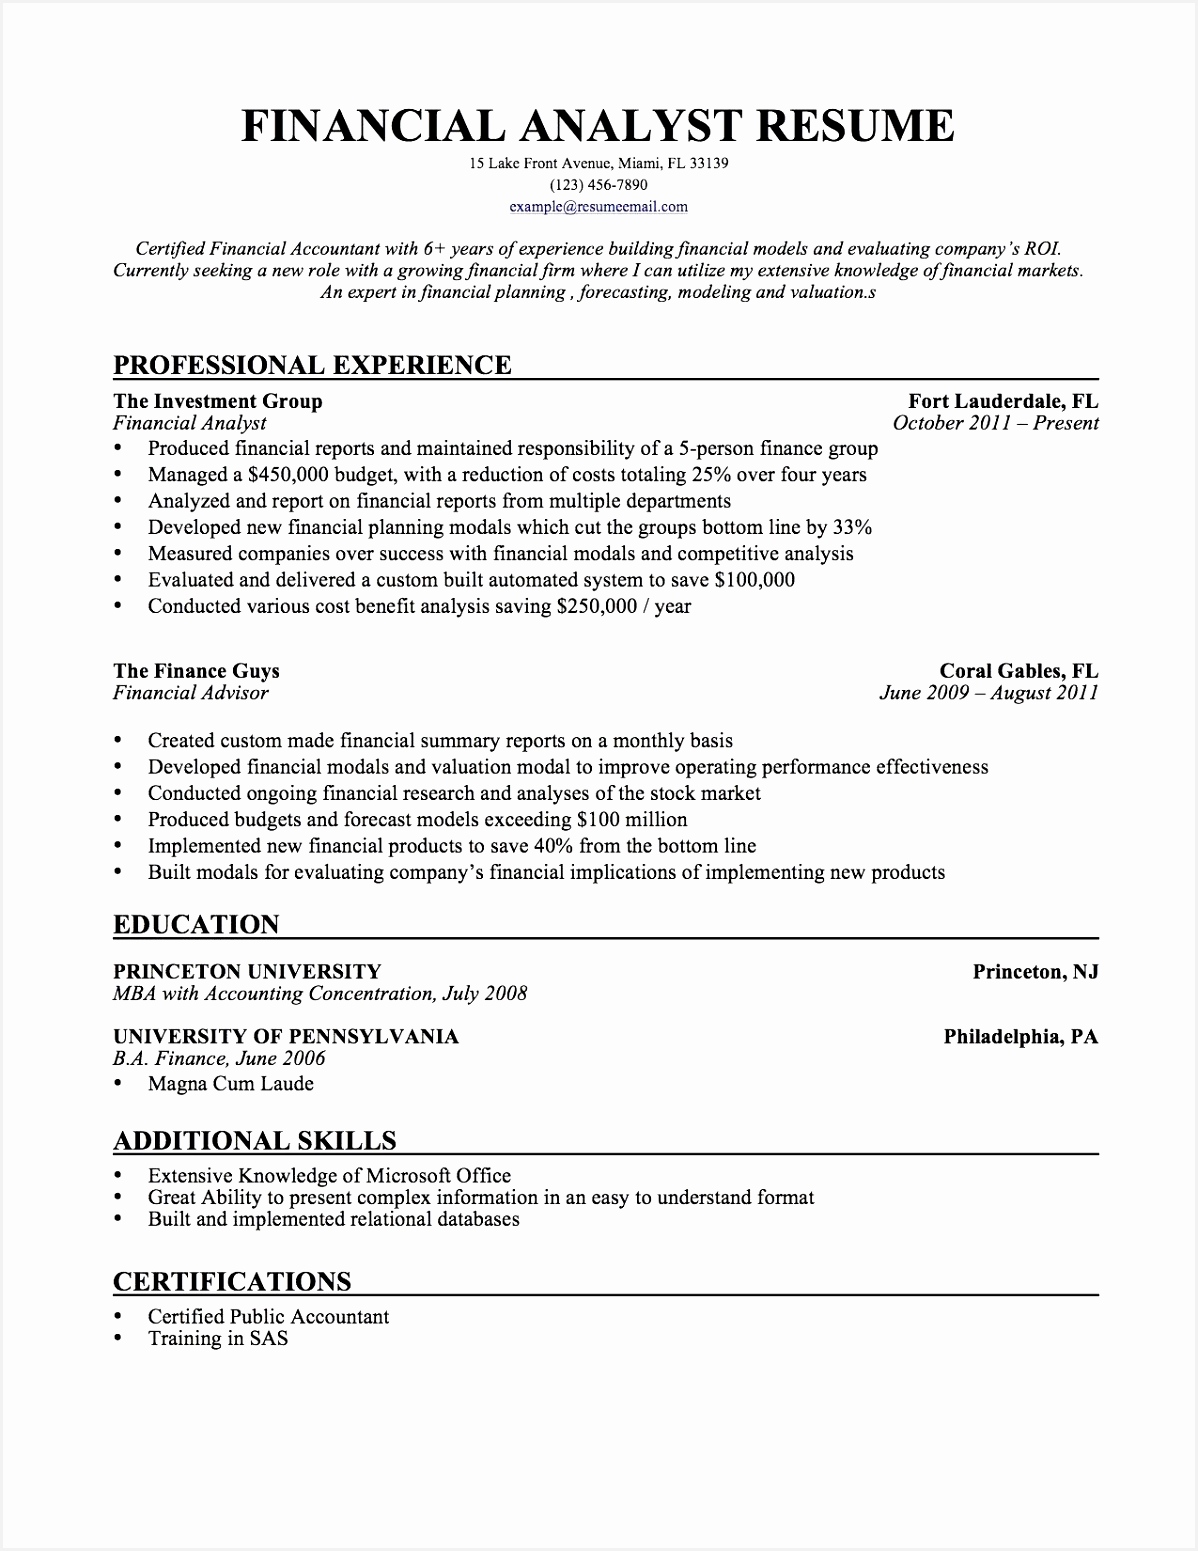 Financial Analyst Resume Sample New 21 Financial Analyst Sample Resume Bcbostonians1986 Financial Analyst Resume Sample 15511198vUble